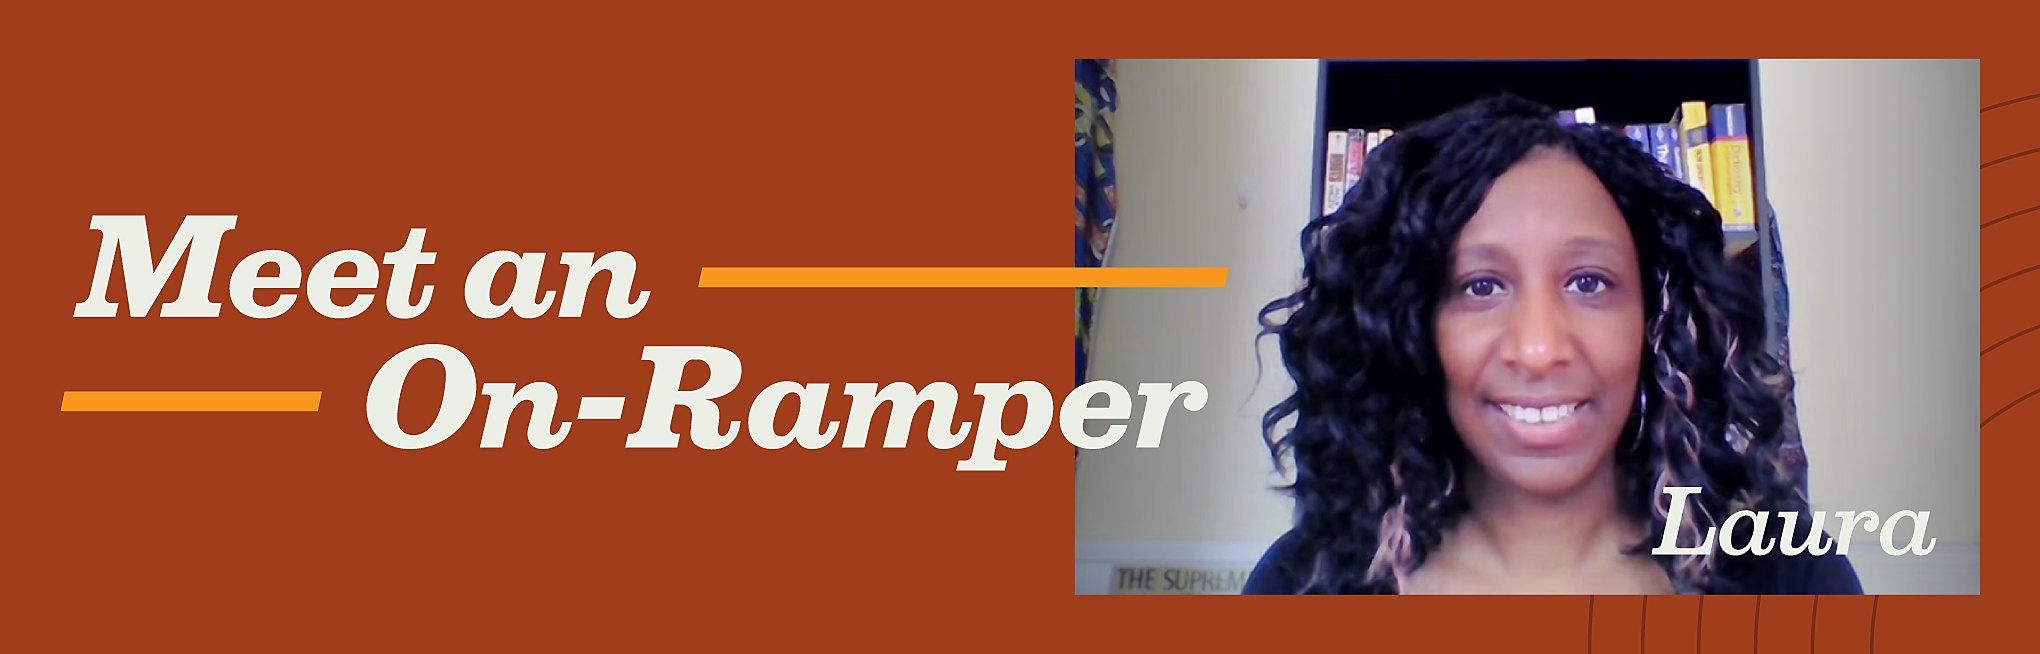 On-Ramper's photos with the "Meet an On-Ramper" caption